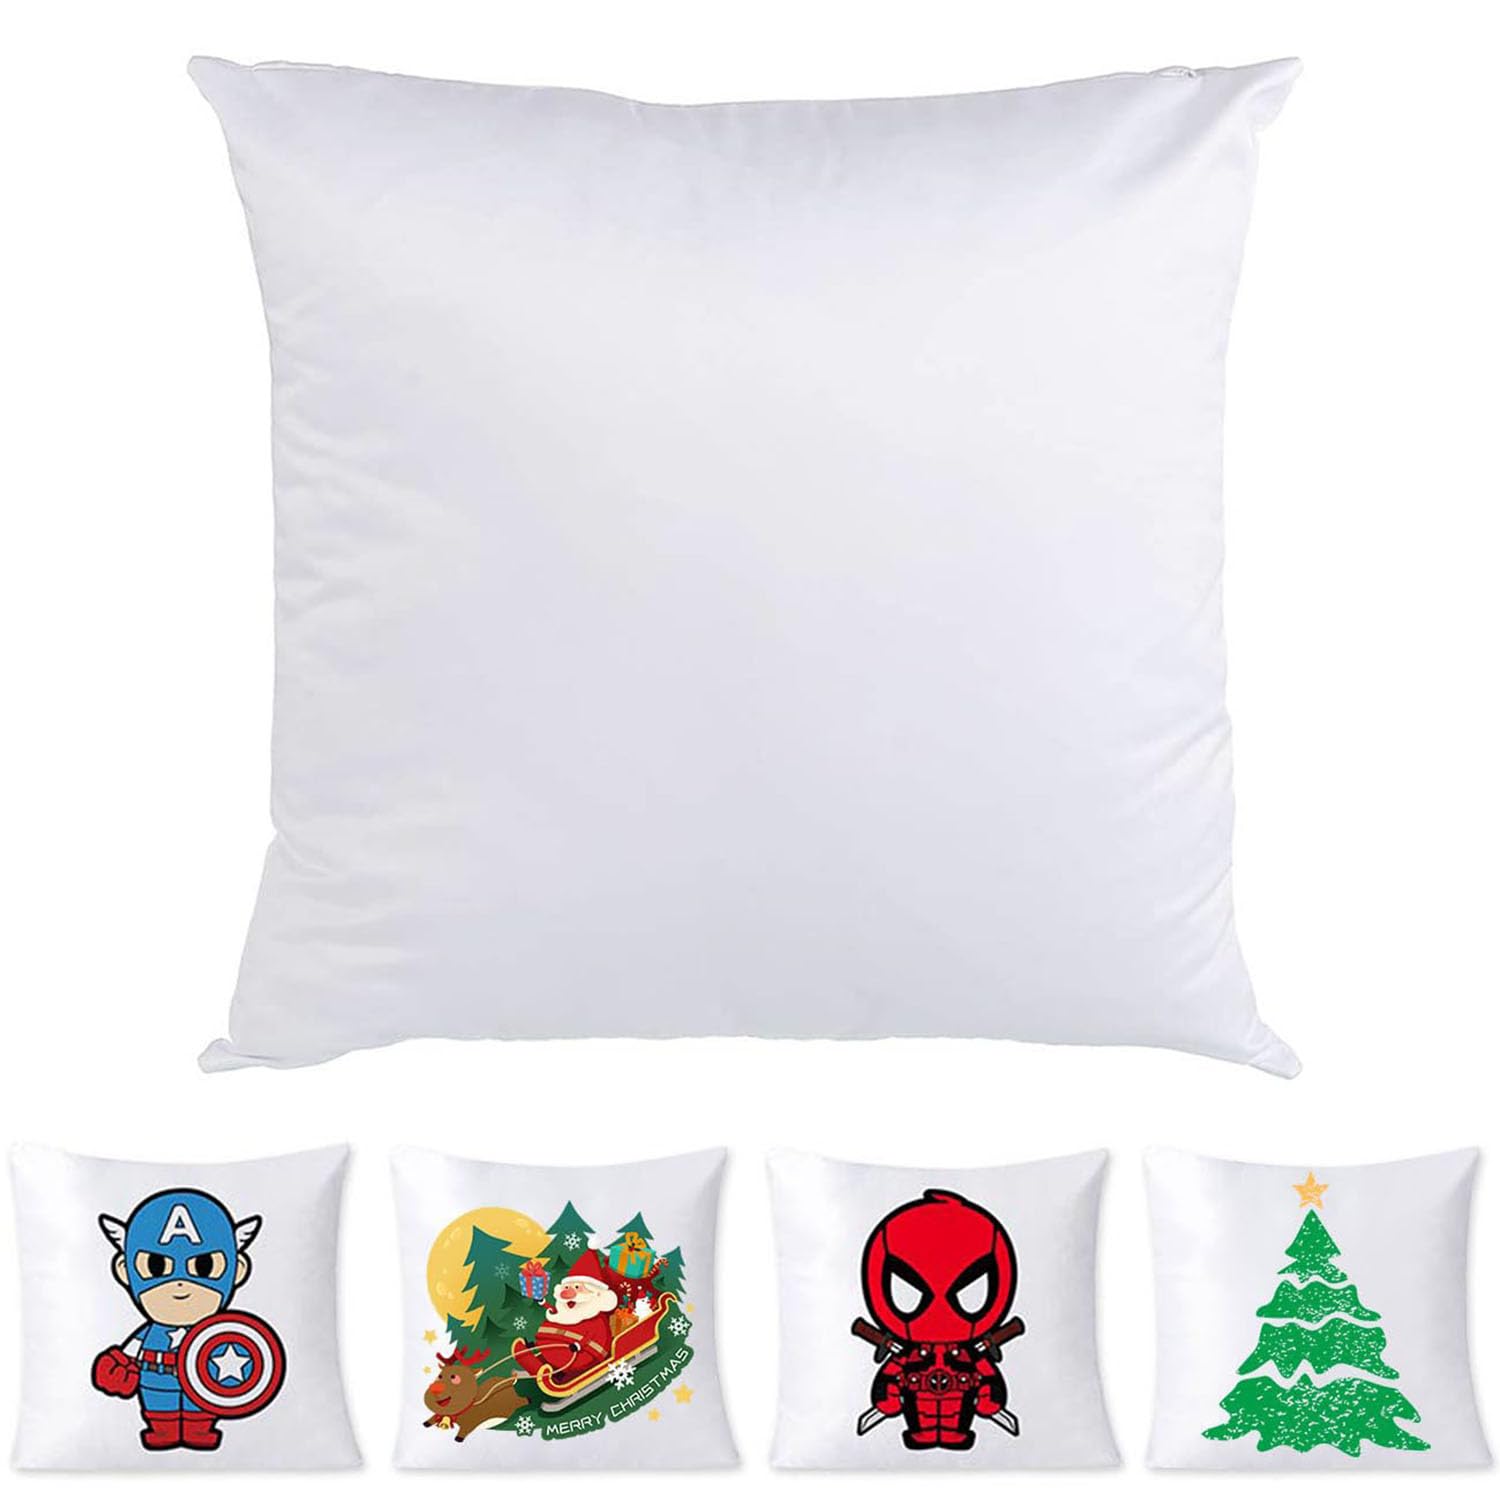 sublimation blank pillow cases